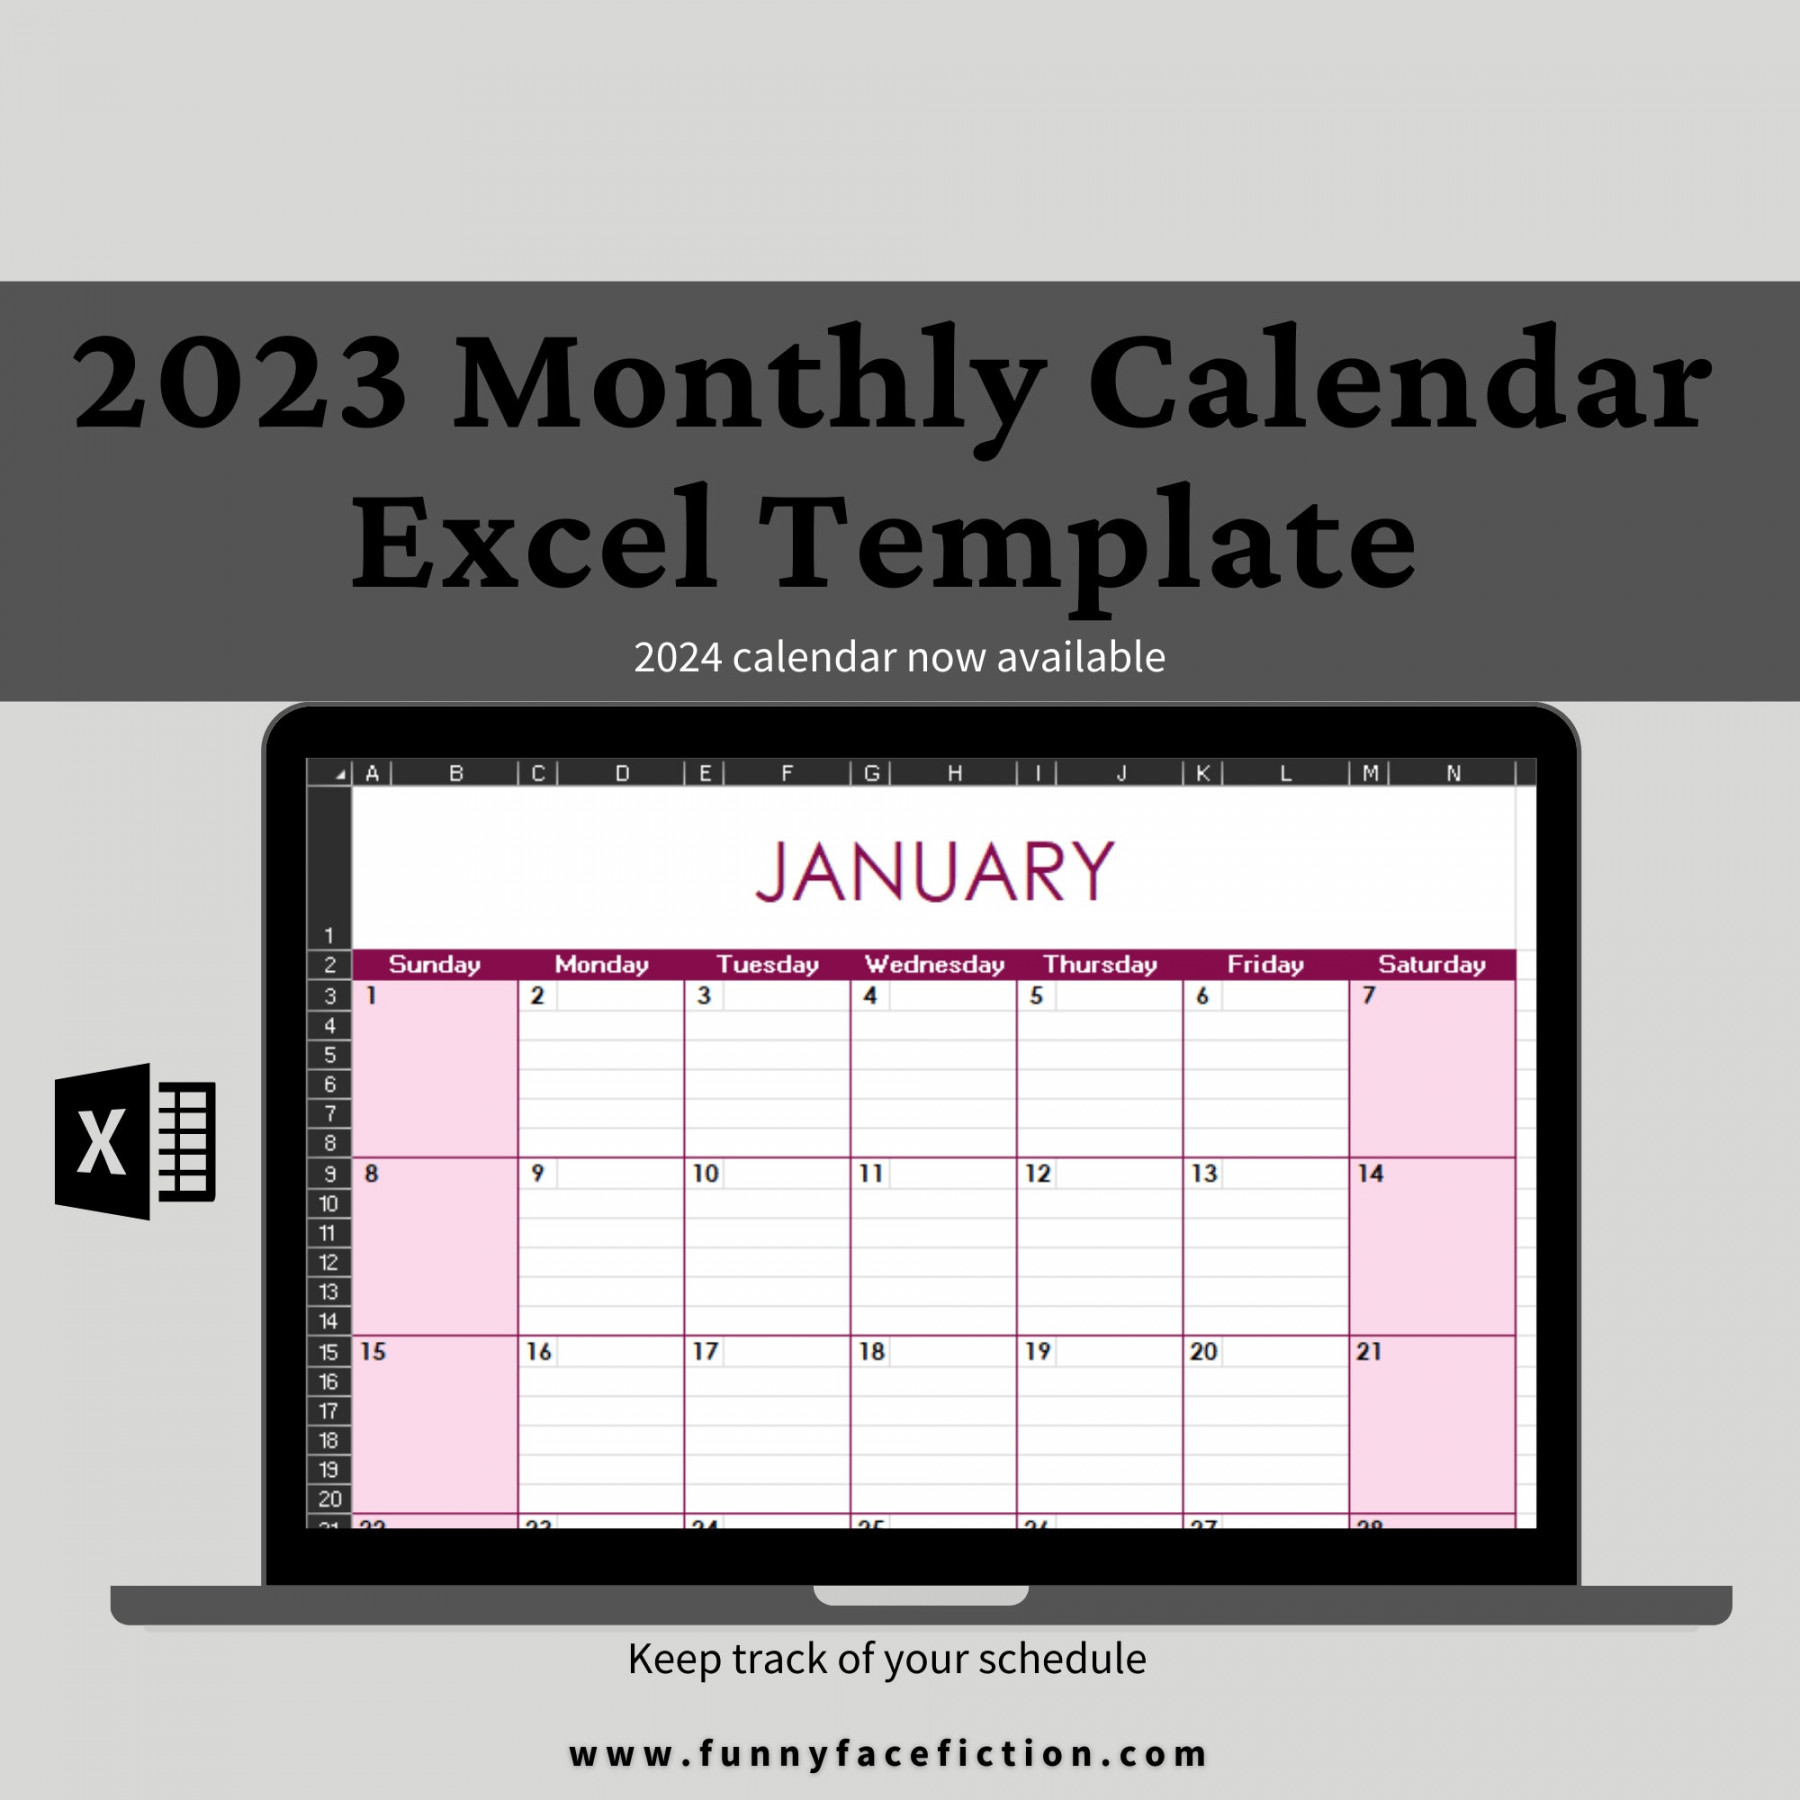 Monthly Calendar Template Excel Excel Monthly Calendar - Etsy